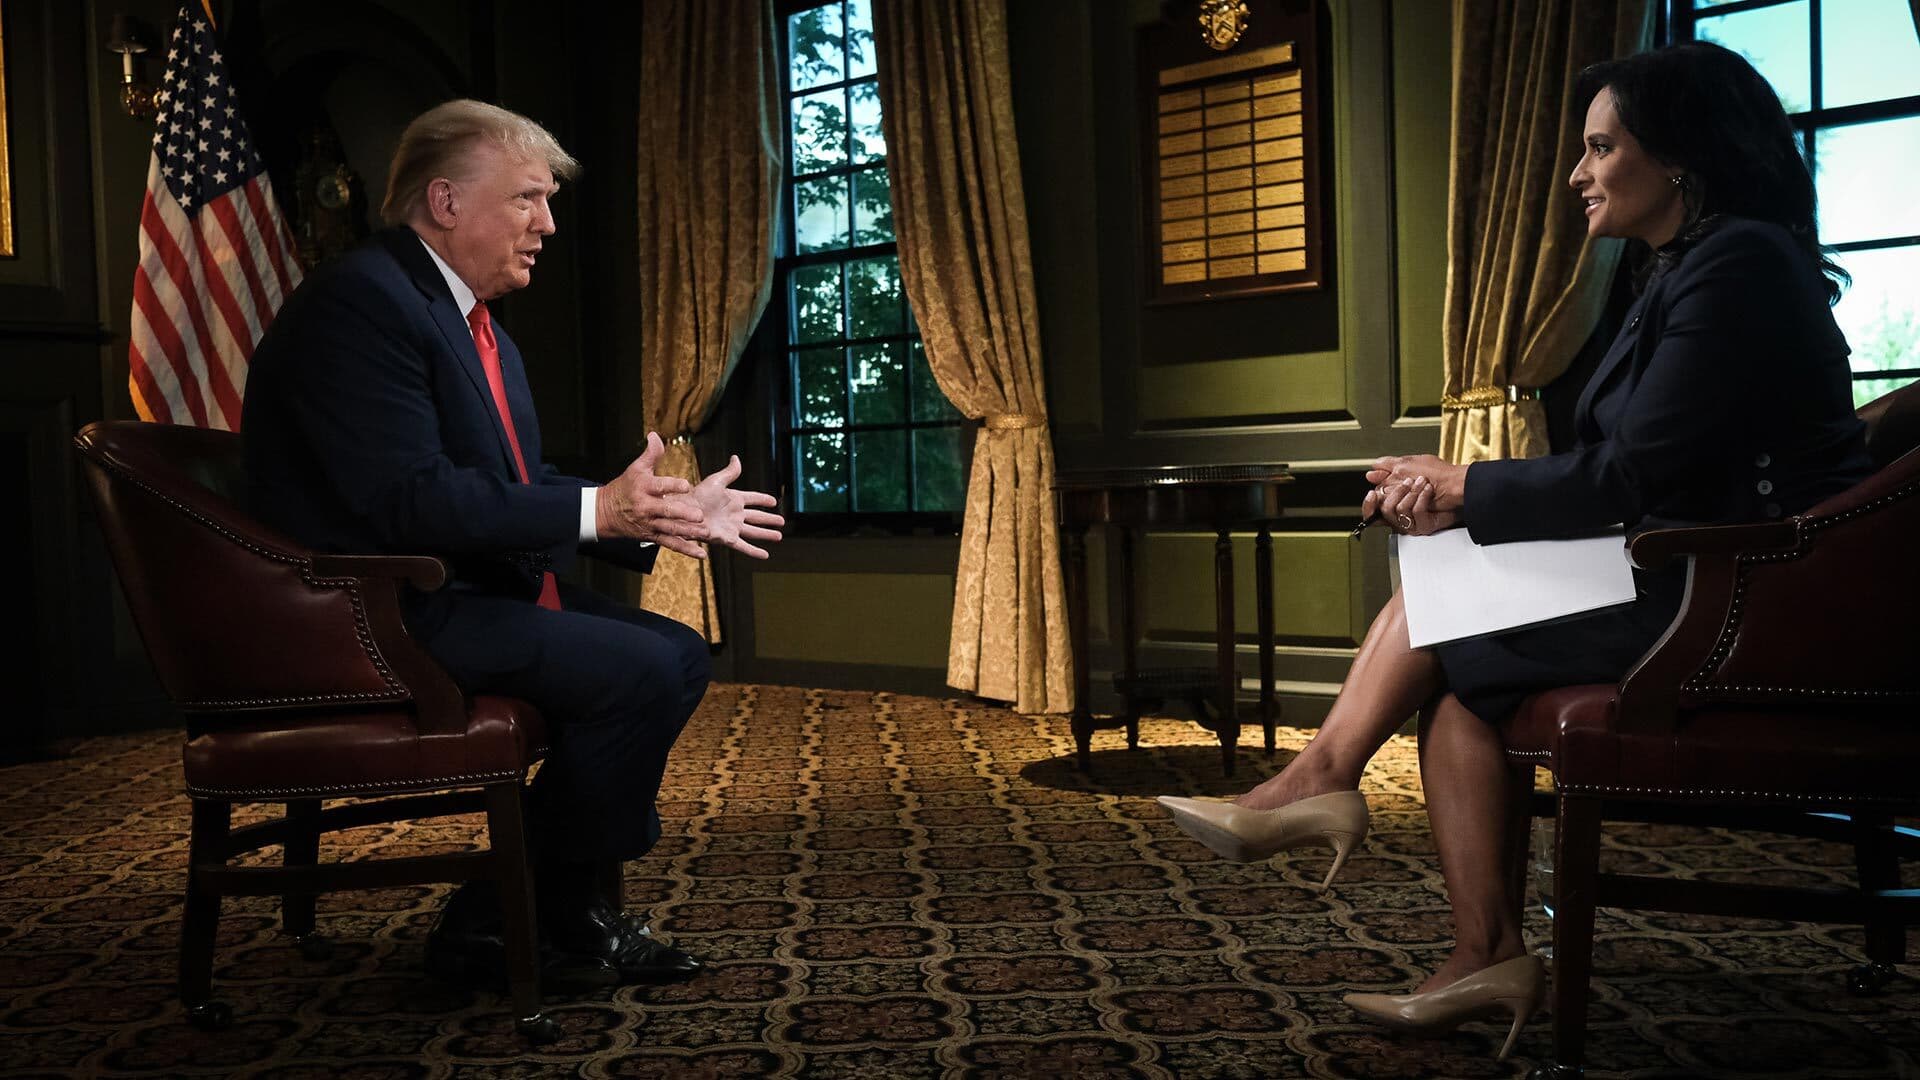 Donald Trump sits opposite from a female reporter